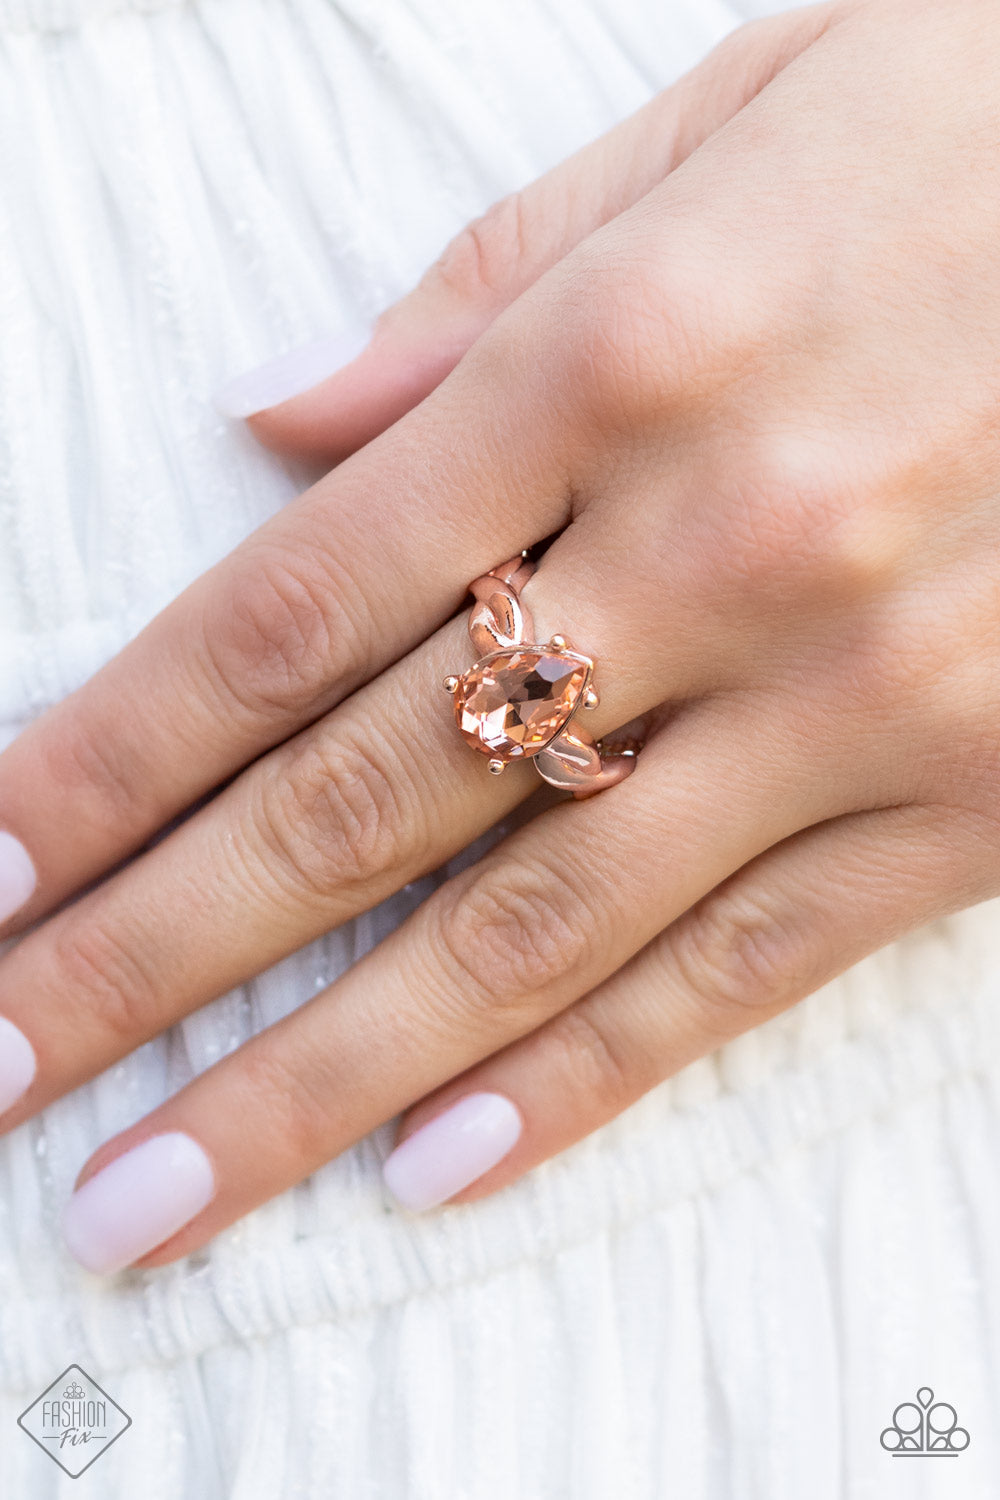 Paparazzi Ring Law of Attraction - Rose Gold